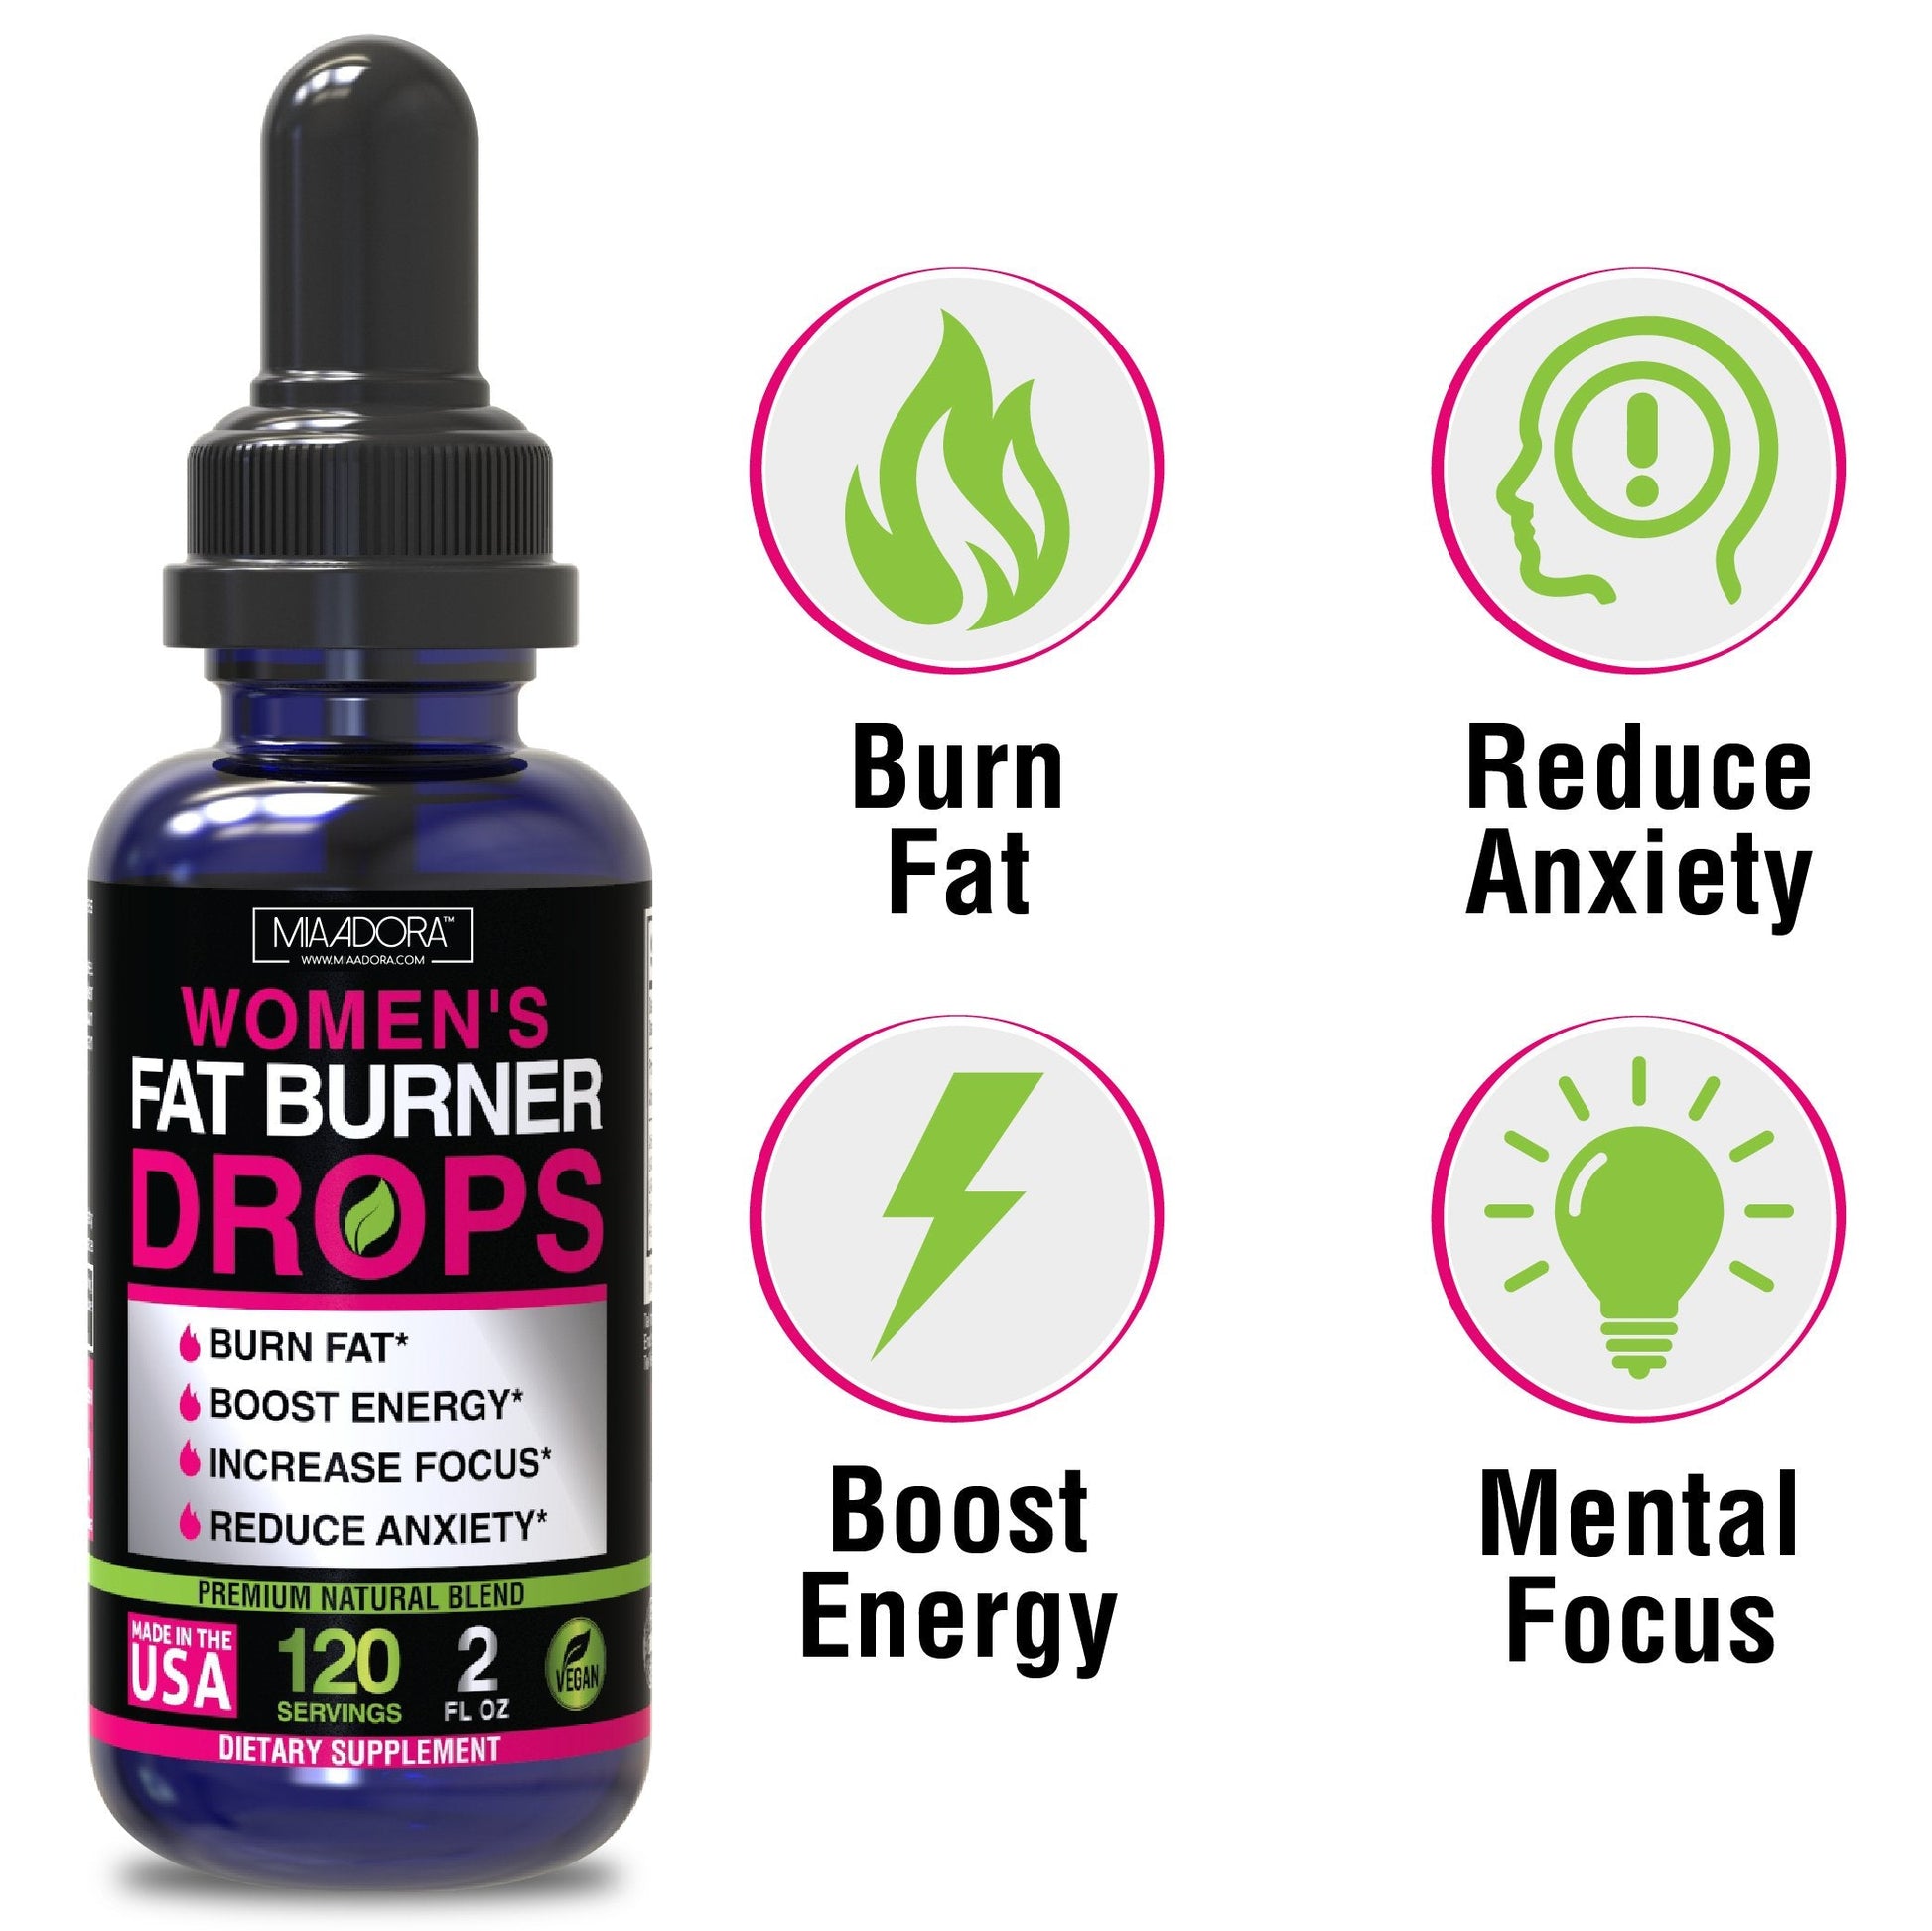 Main benefits of fat burner energy drops for women by Mia Adora: burn fat, reduce anxiety, boost energy, mental focus